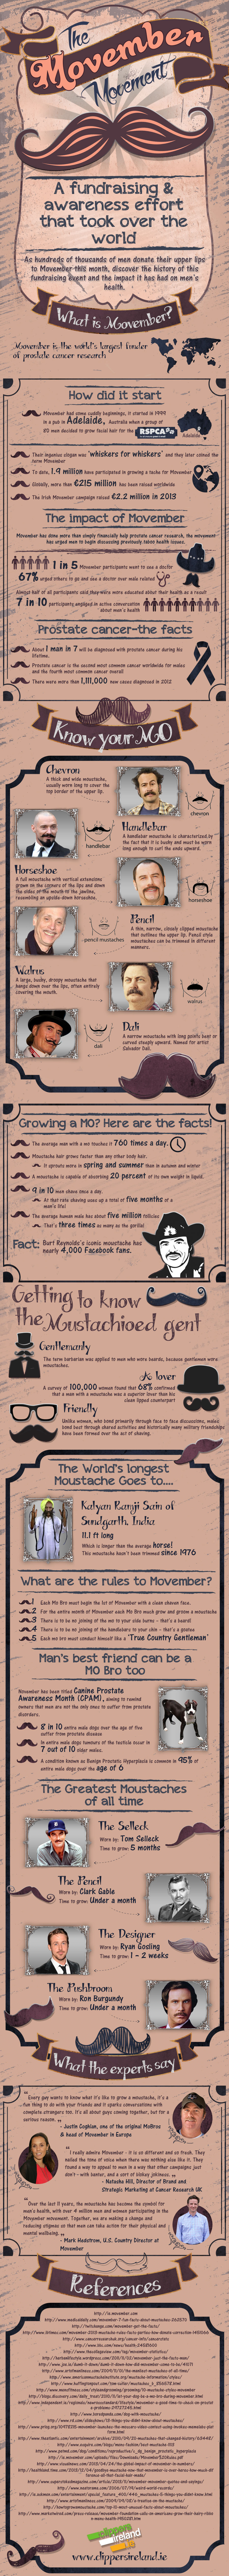 Movember – Do You Know Your Mo